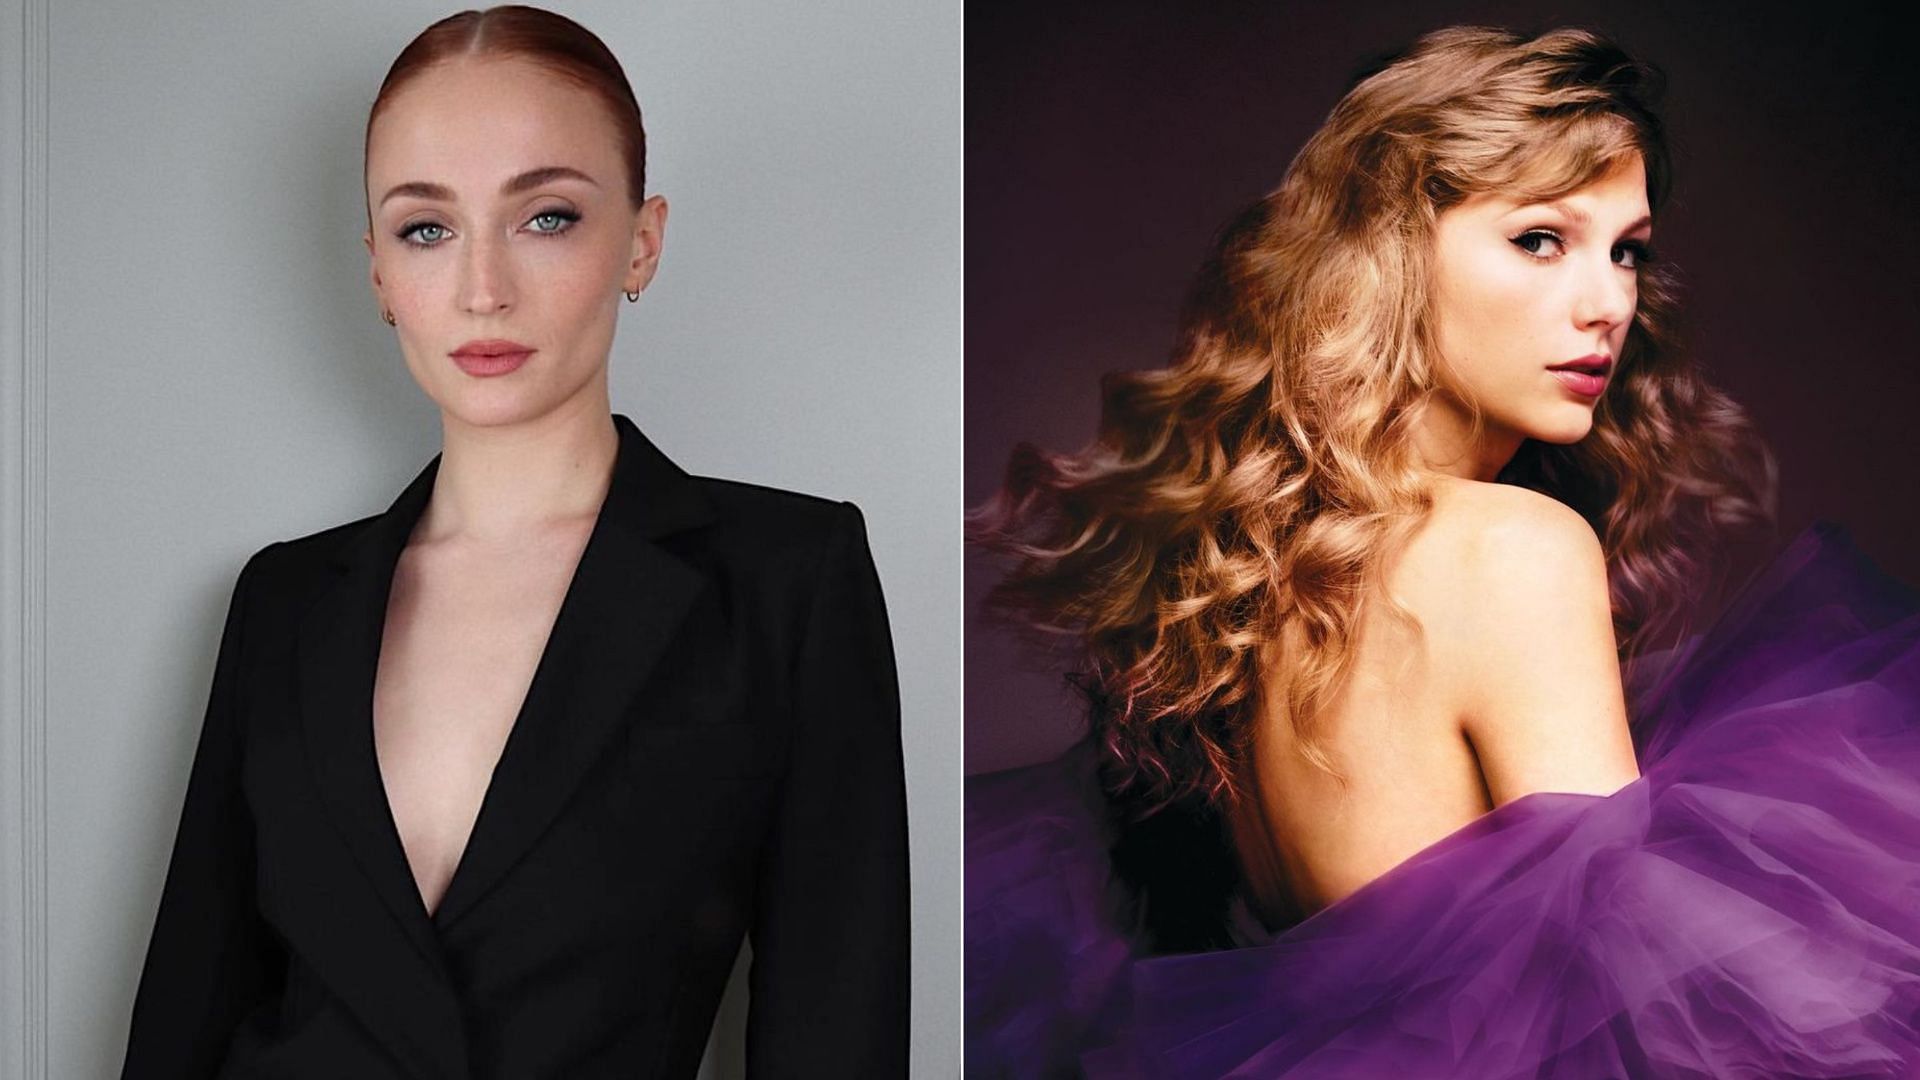 Sophie Turner talked about her friendship with Taylor Swift (Image via Instagram / @sophiet and @taylorswift)